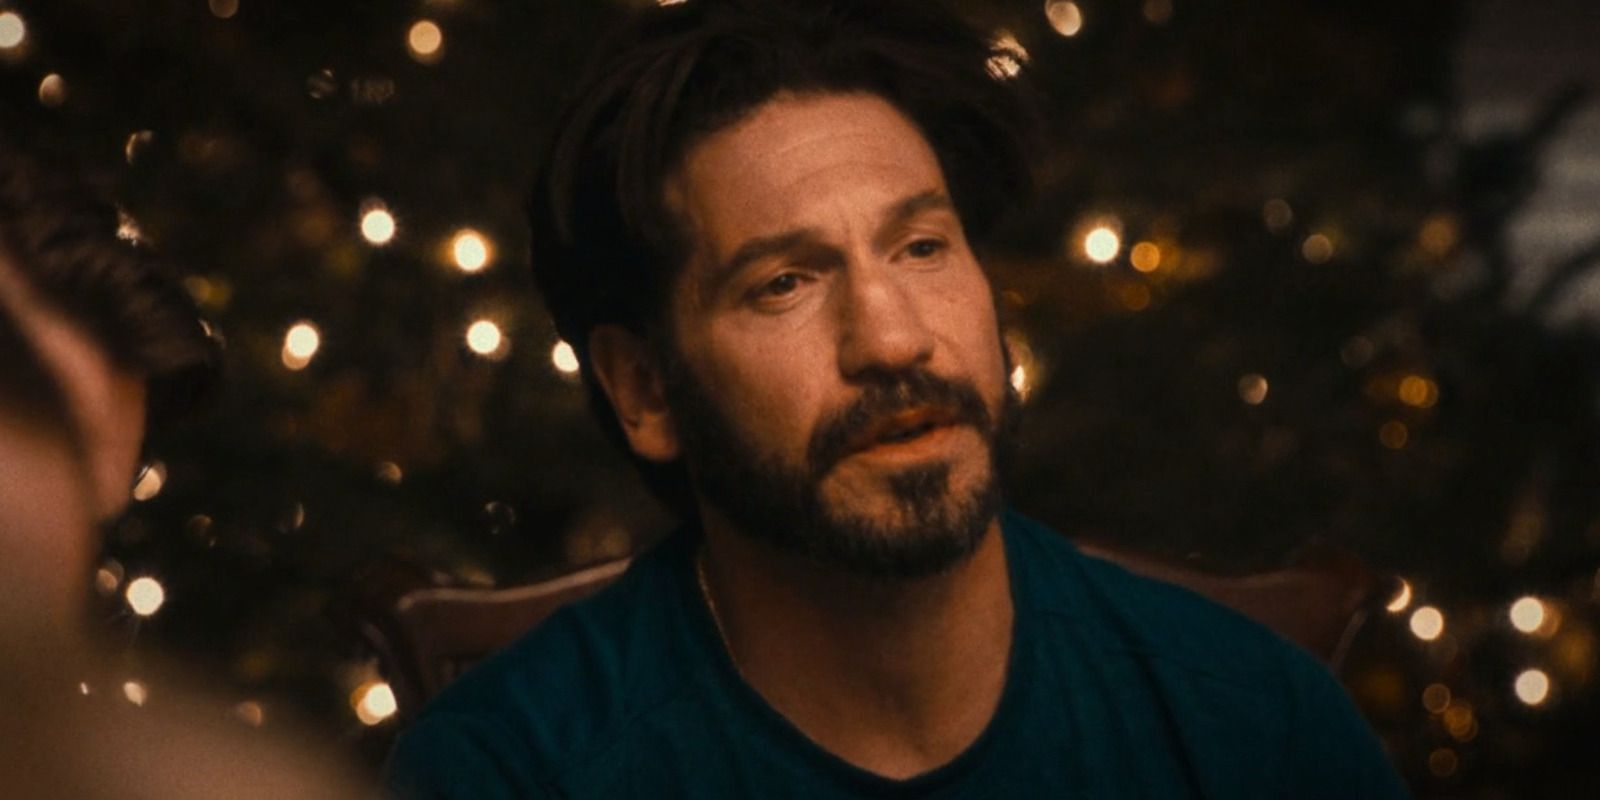 Mikey Berzatto (Jon Bernthal) looking sad at the table in The Bear season 2, episode 6, "Fishes."